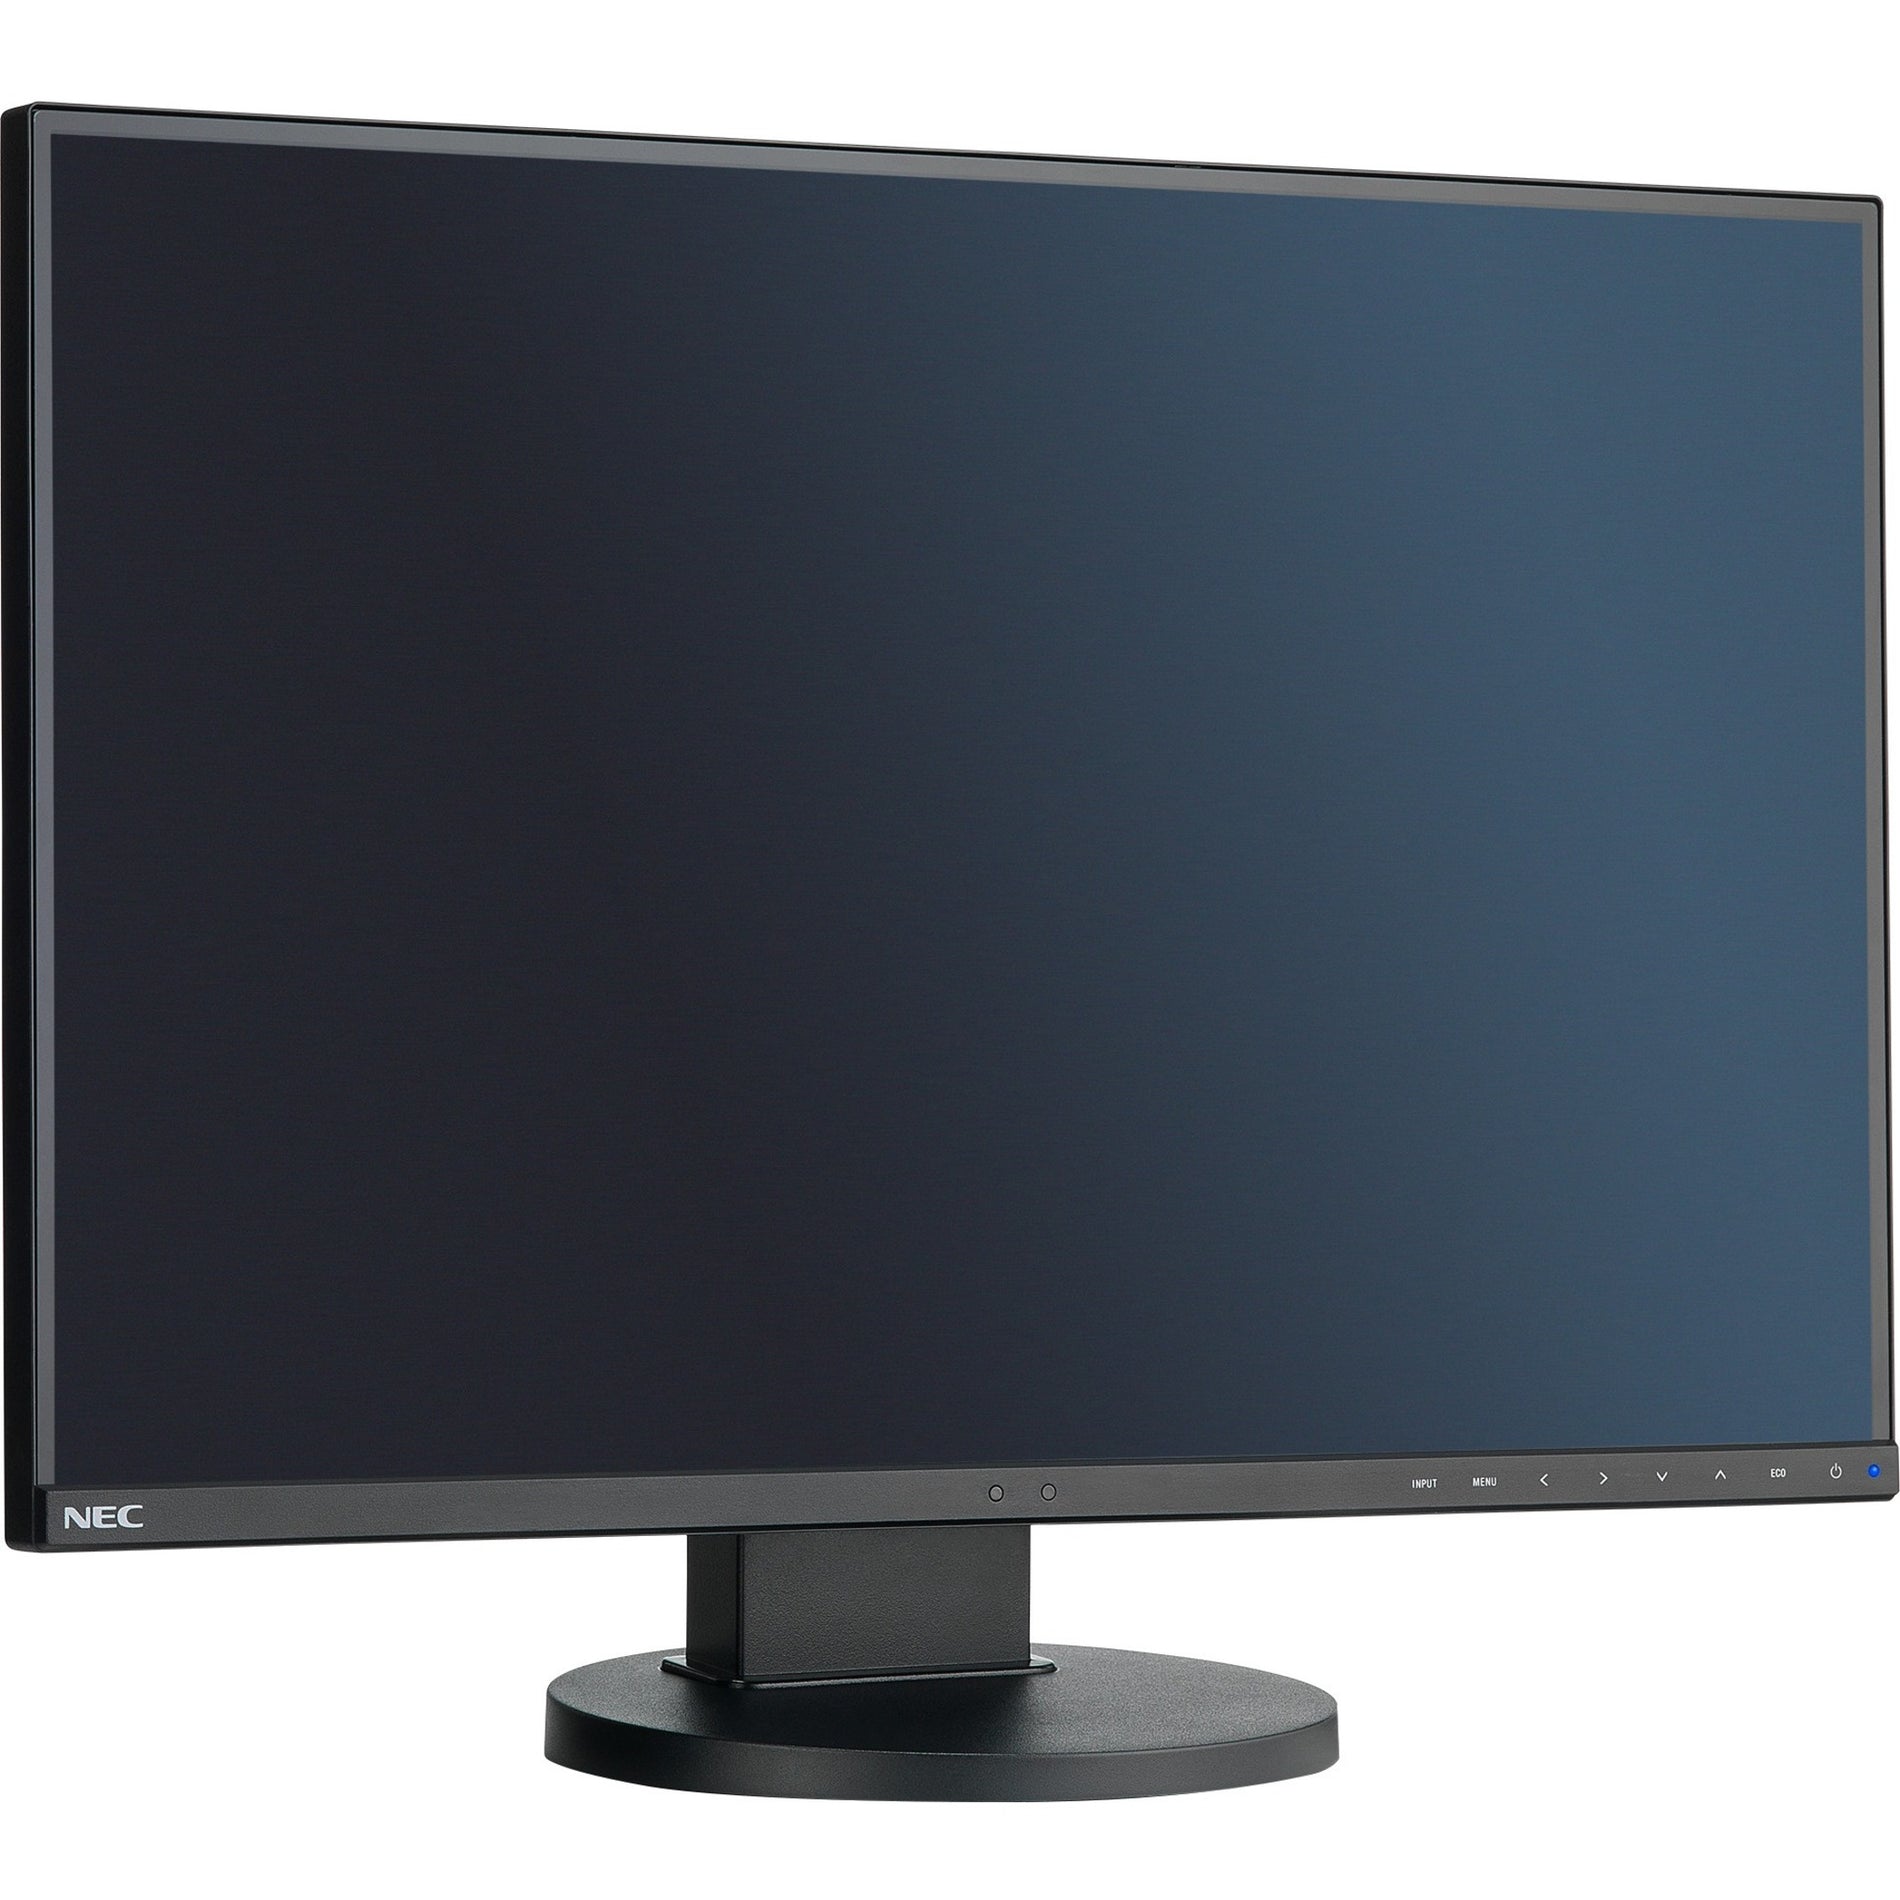 NEC Display EA245WMI-BK-SV 24" Widescreen IPS Desktop Monitor with SpectraViewII Color Calibration, 1920 x 1200, 300 Nit, 1,000:1, 16.7 Million Colors